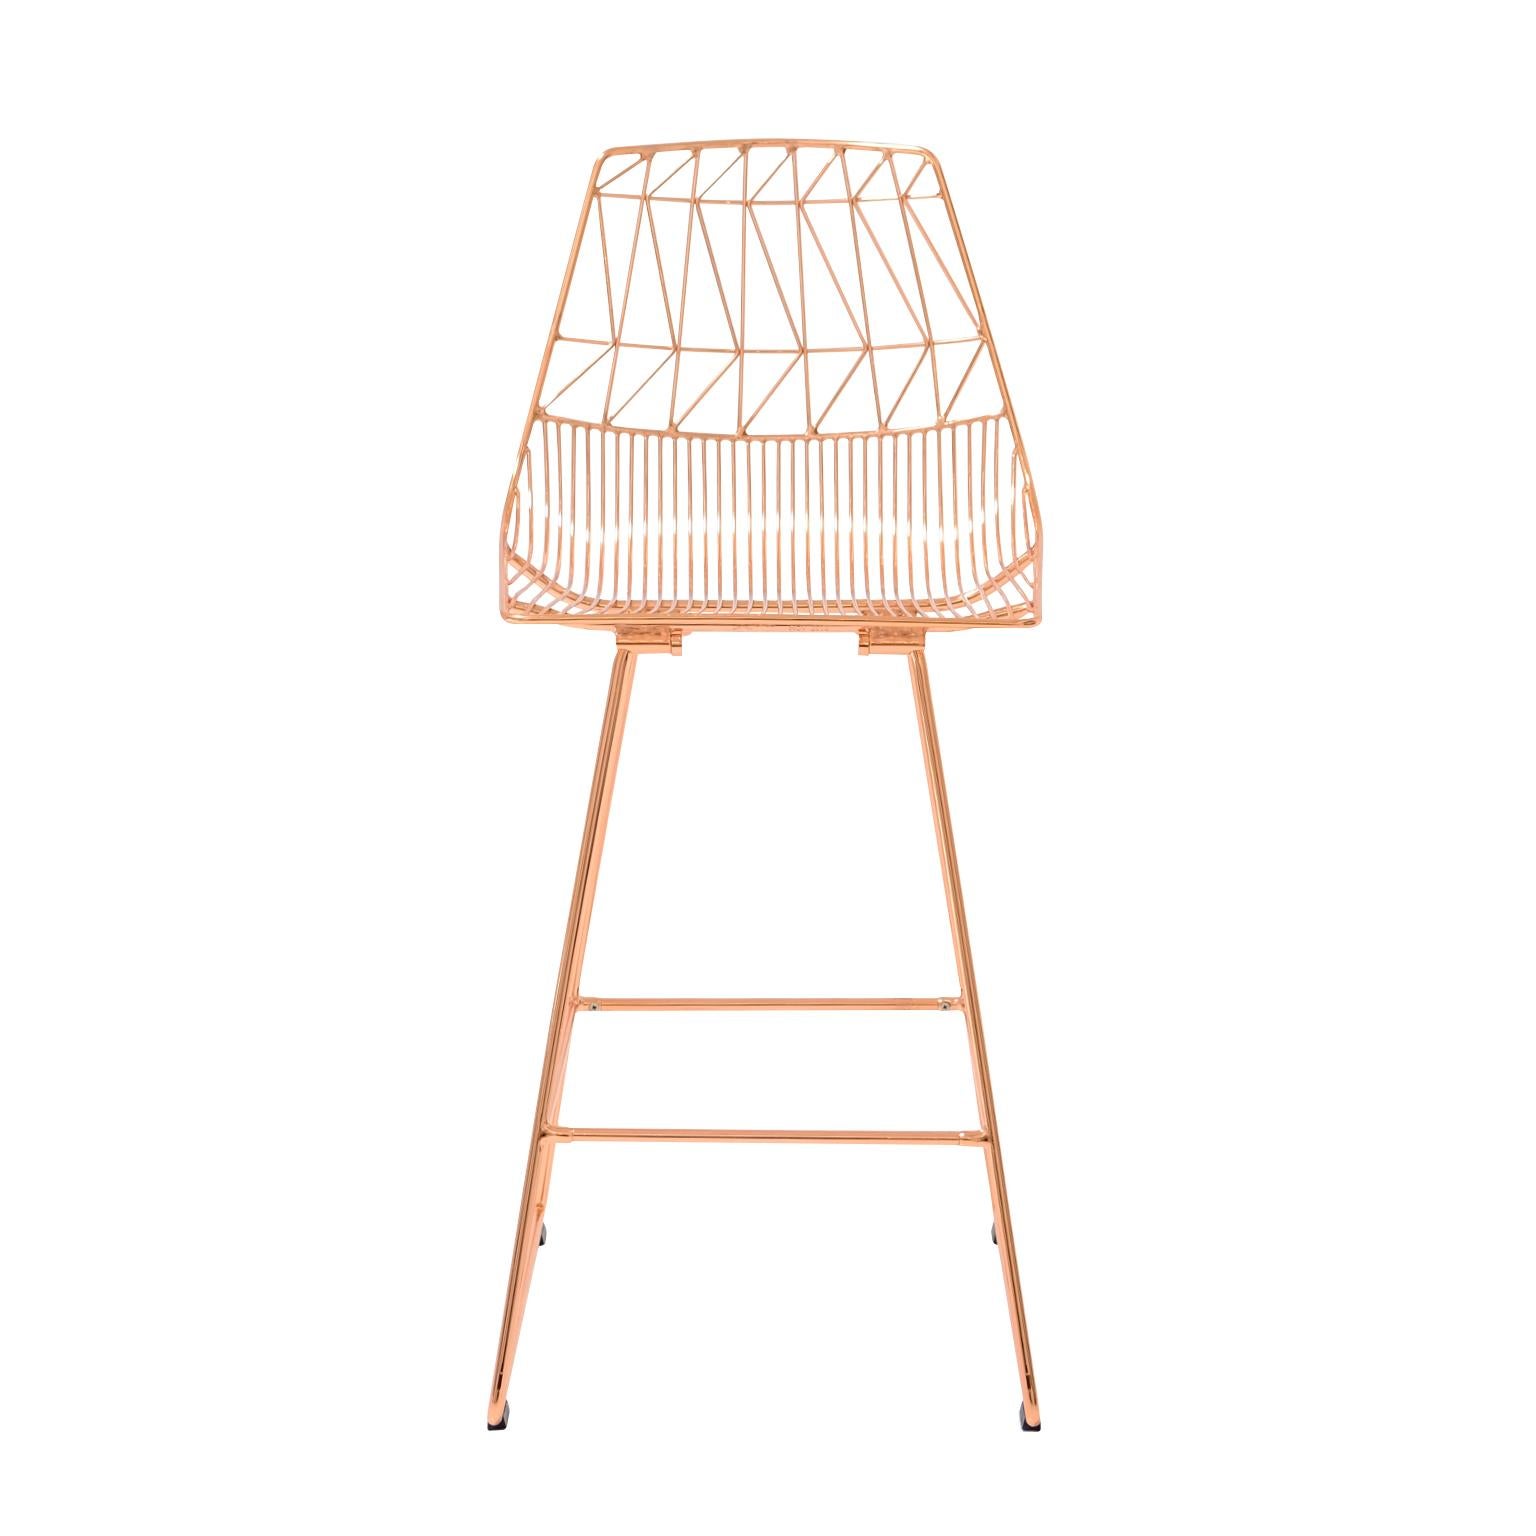 Bend Goods Wire Furniture
The Lucy counter stool can be found in commercial projects around the world, from Los Angeles to Paris. With the contemporary wire design of Bend Goods' signature Lucy chair and a variety of durable and customizable